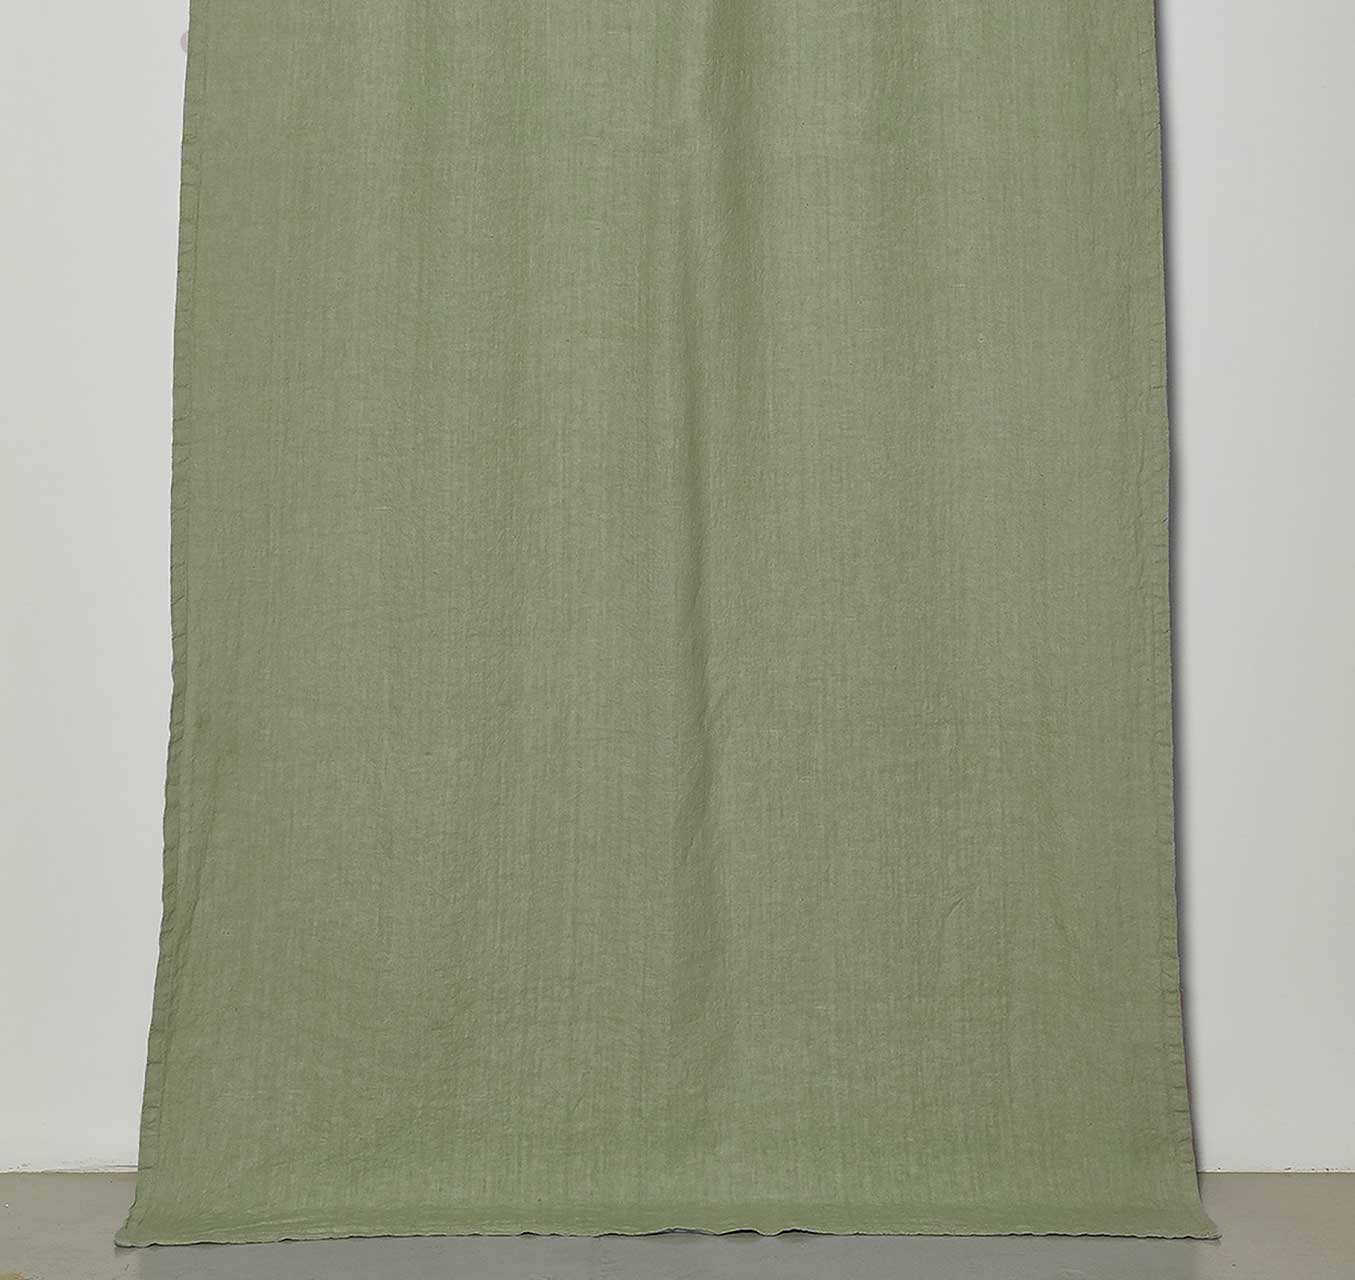 Curtain with A'jour embroidery, drawstring trim * while stocks last